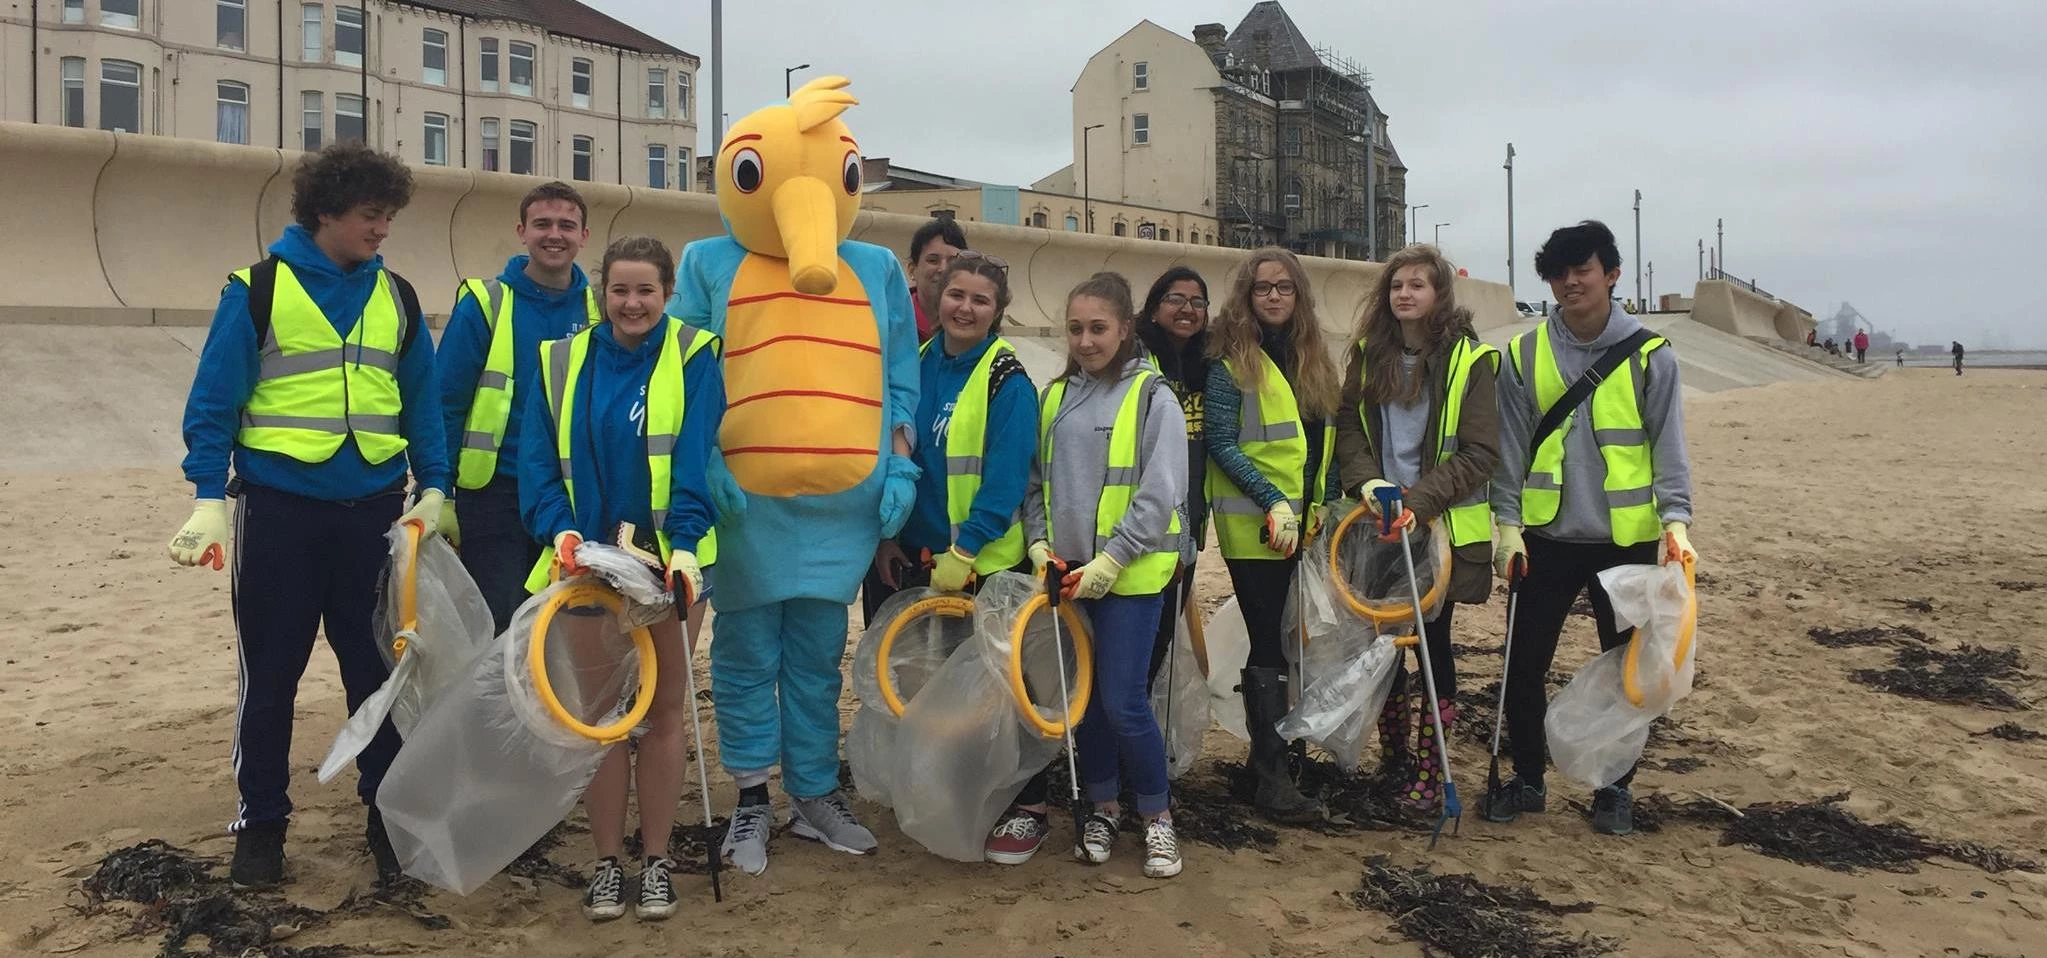 The National Citizen Service (NCS) North East youth board at the Redcar beach clean-up